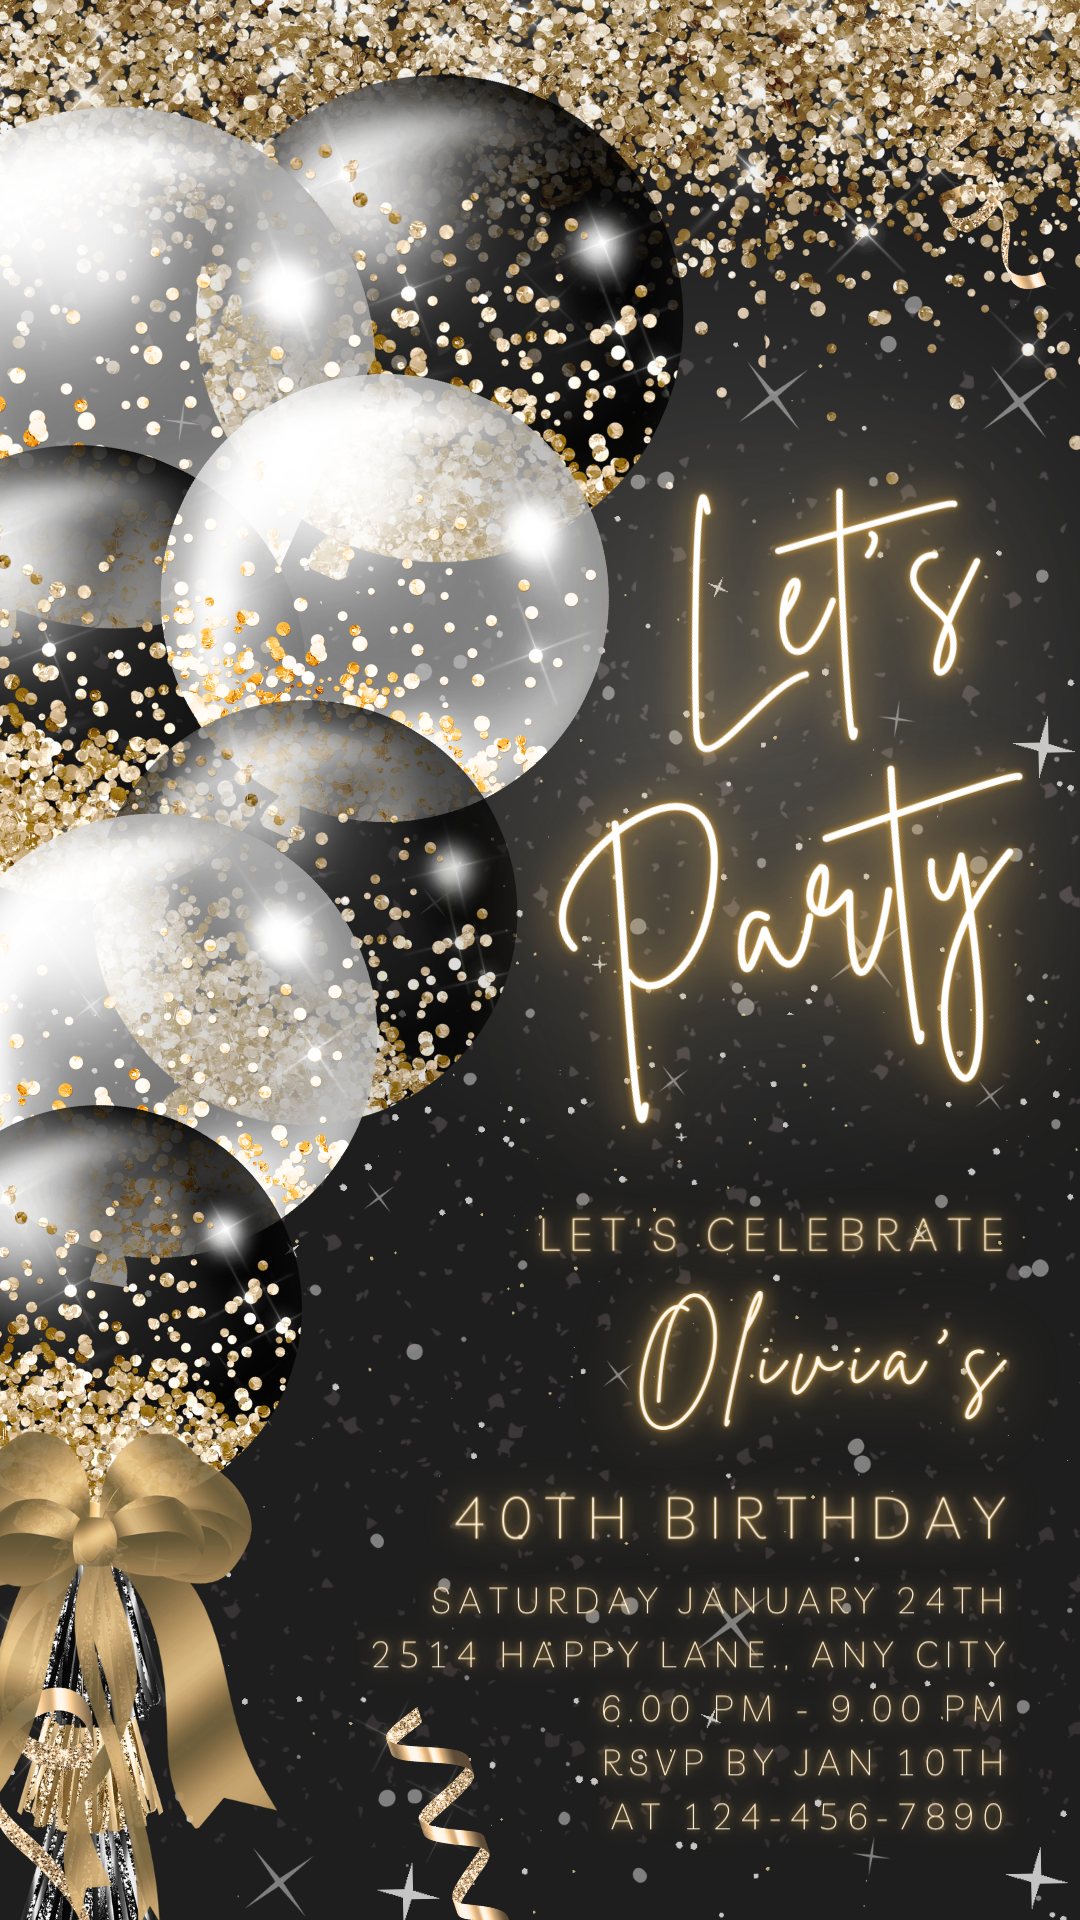 Animated Let's Party invitation, Glittery Dancing Night Invite for any Event Celebration, Editable Video Birthday Template | Digital E-vite